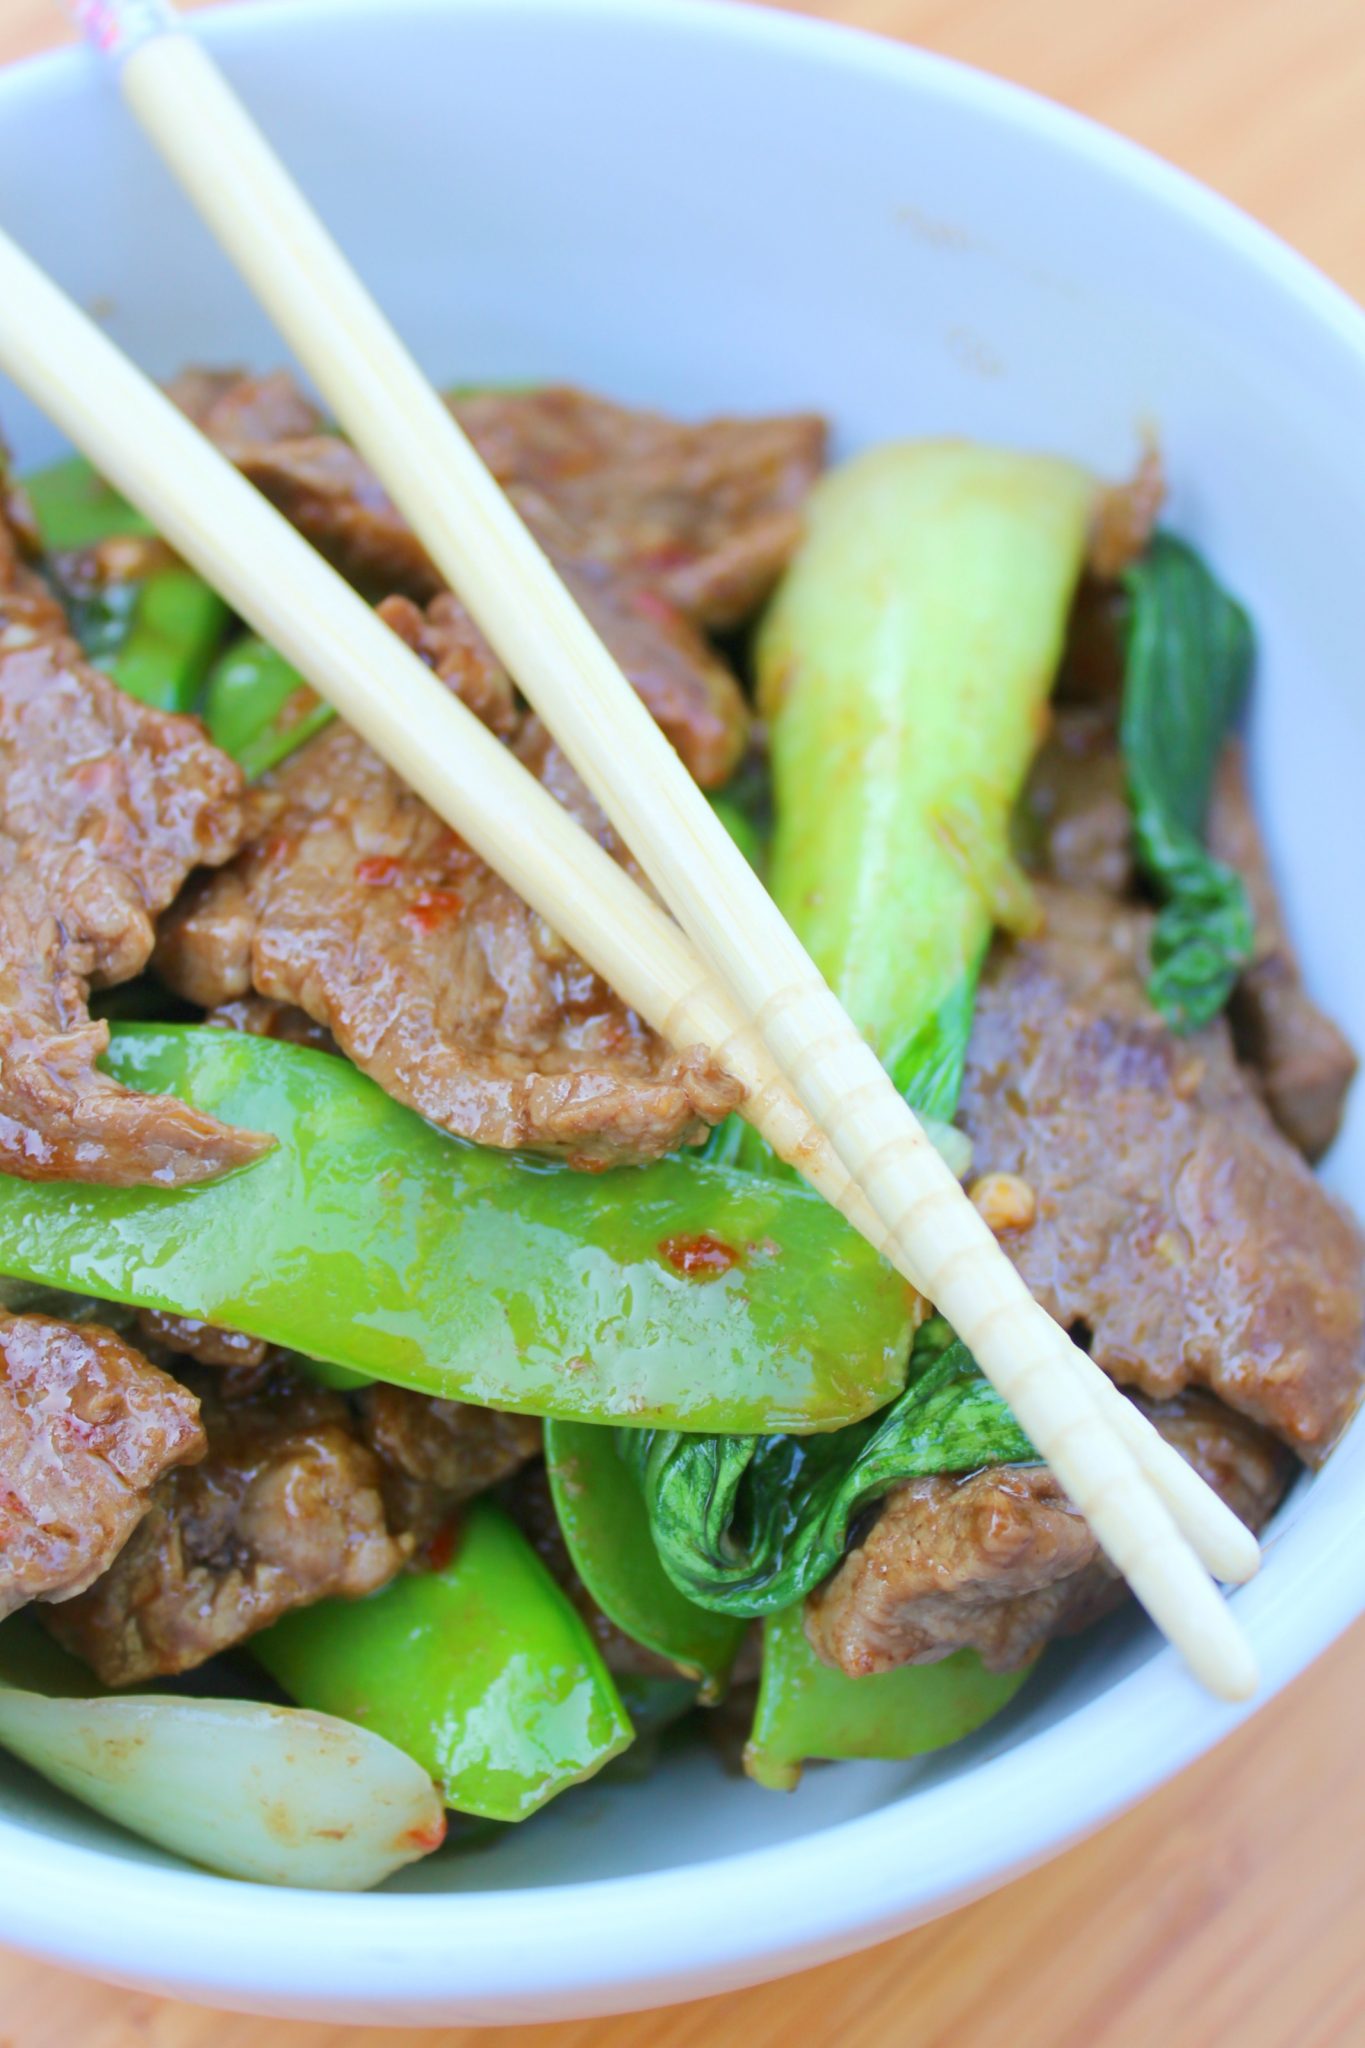 Beef stir-fry with bok choy and snow peas | Johanny's Kitchen